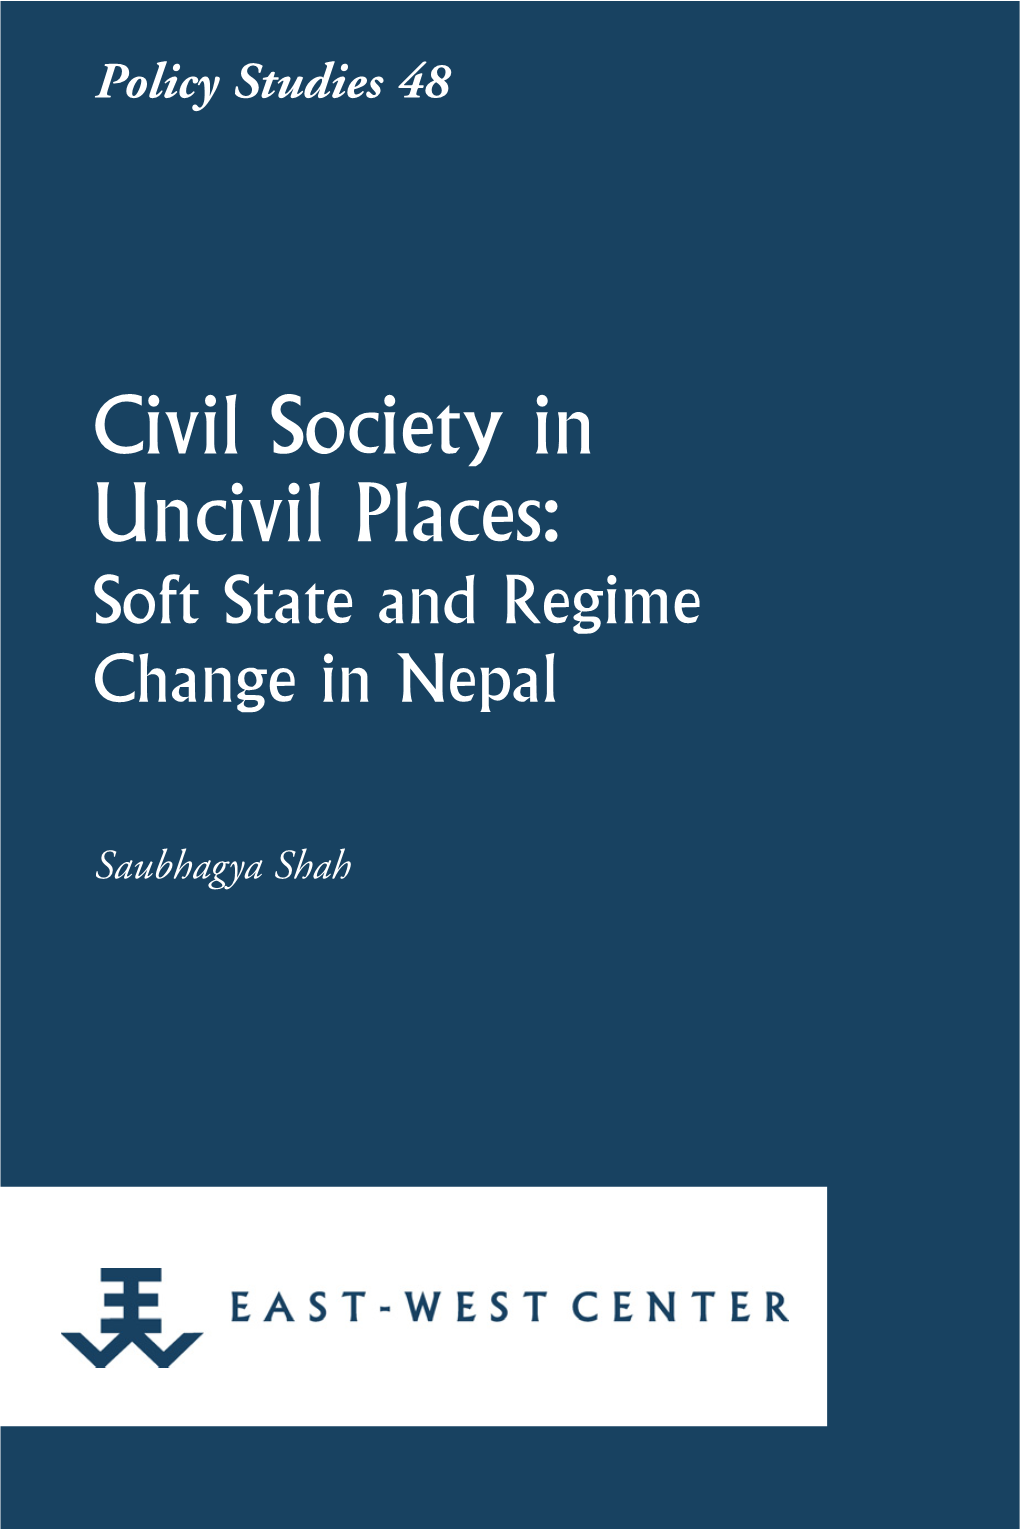 Civil Society in Uncivil Places: Soft State and Regime Change in Nepal